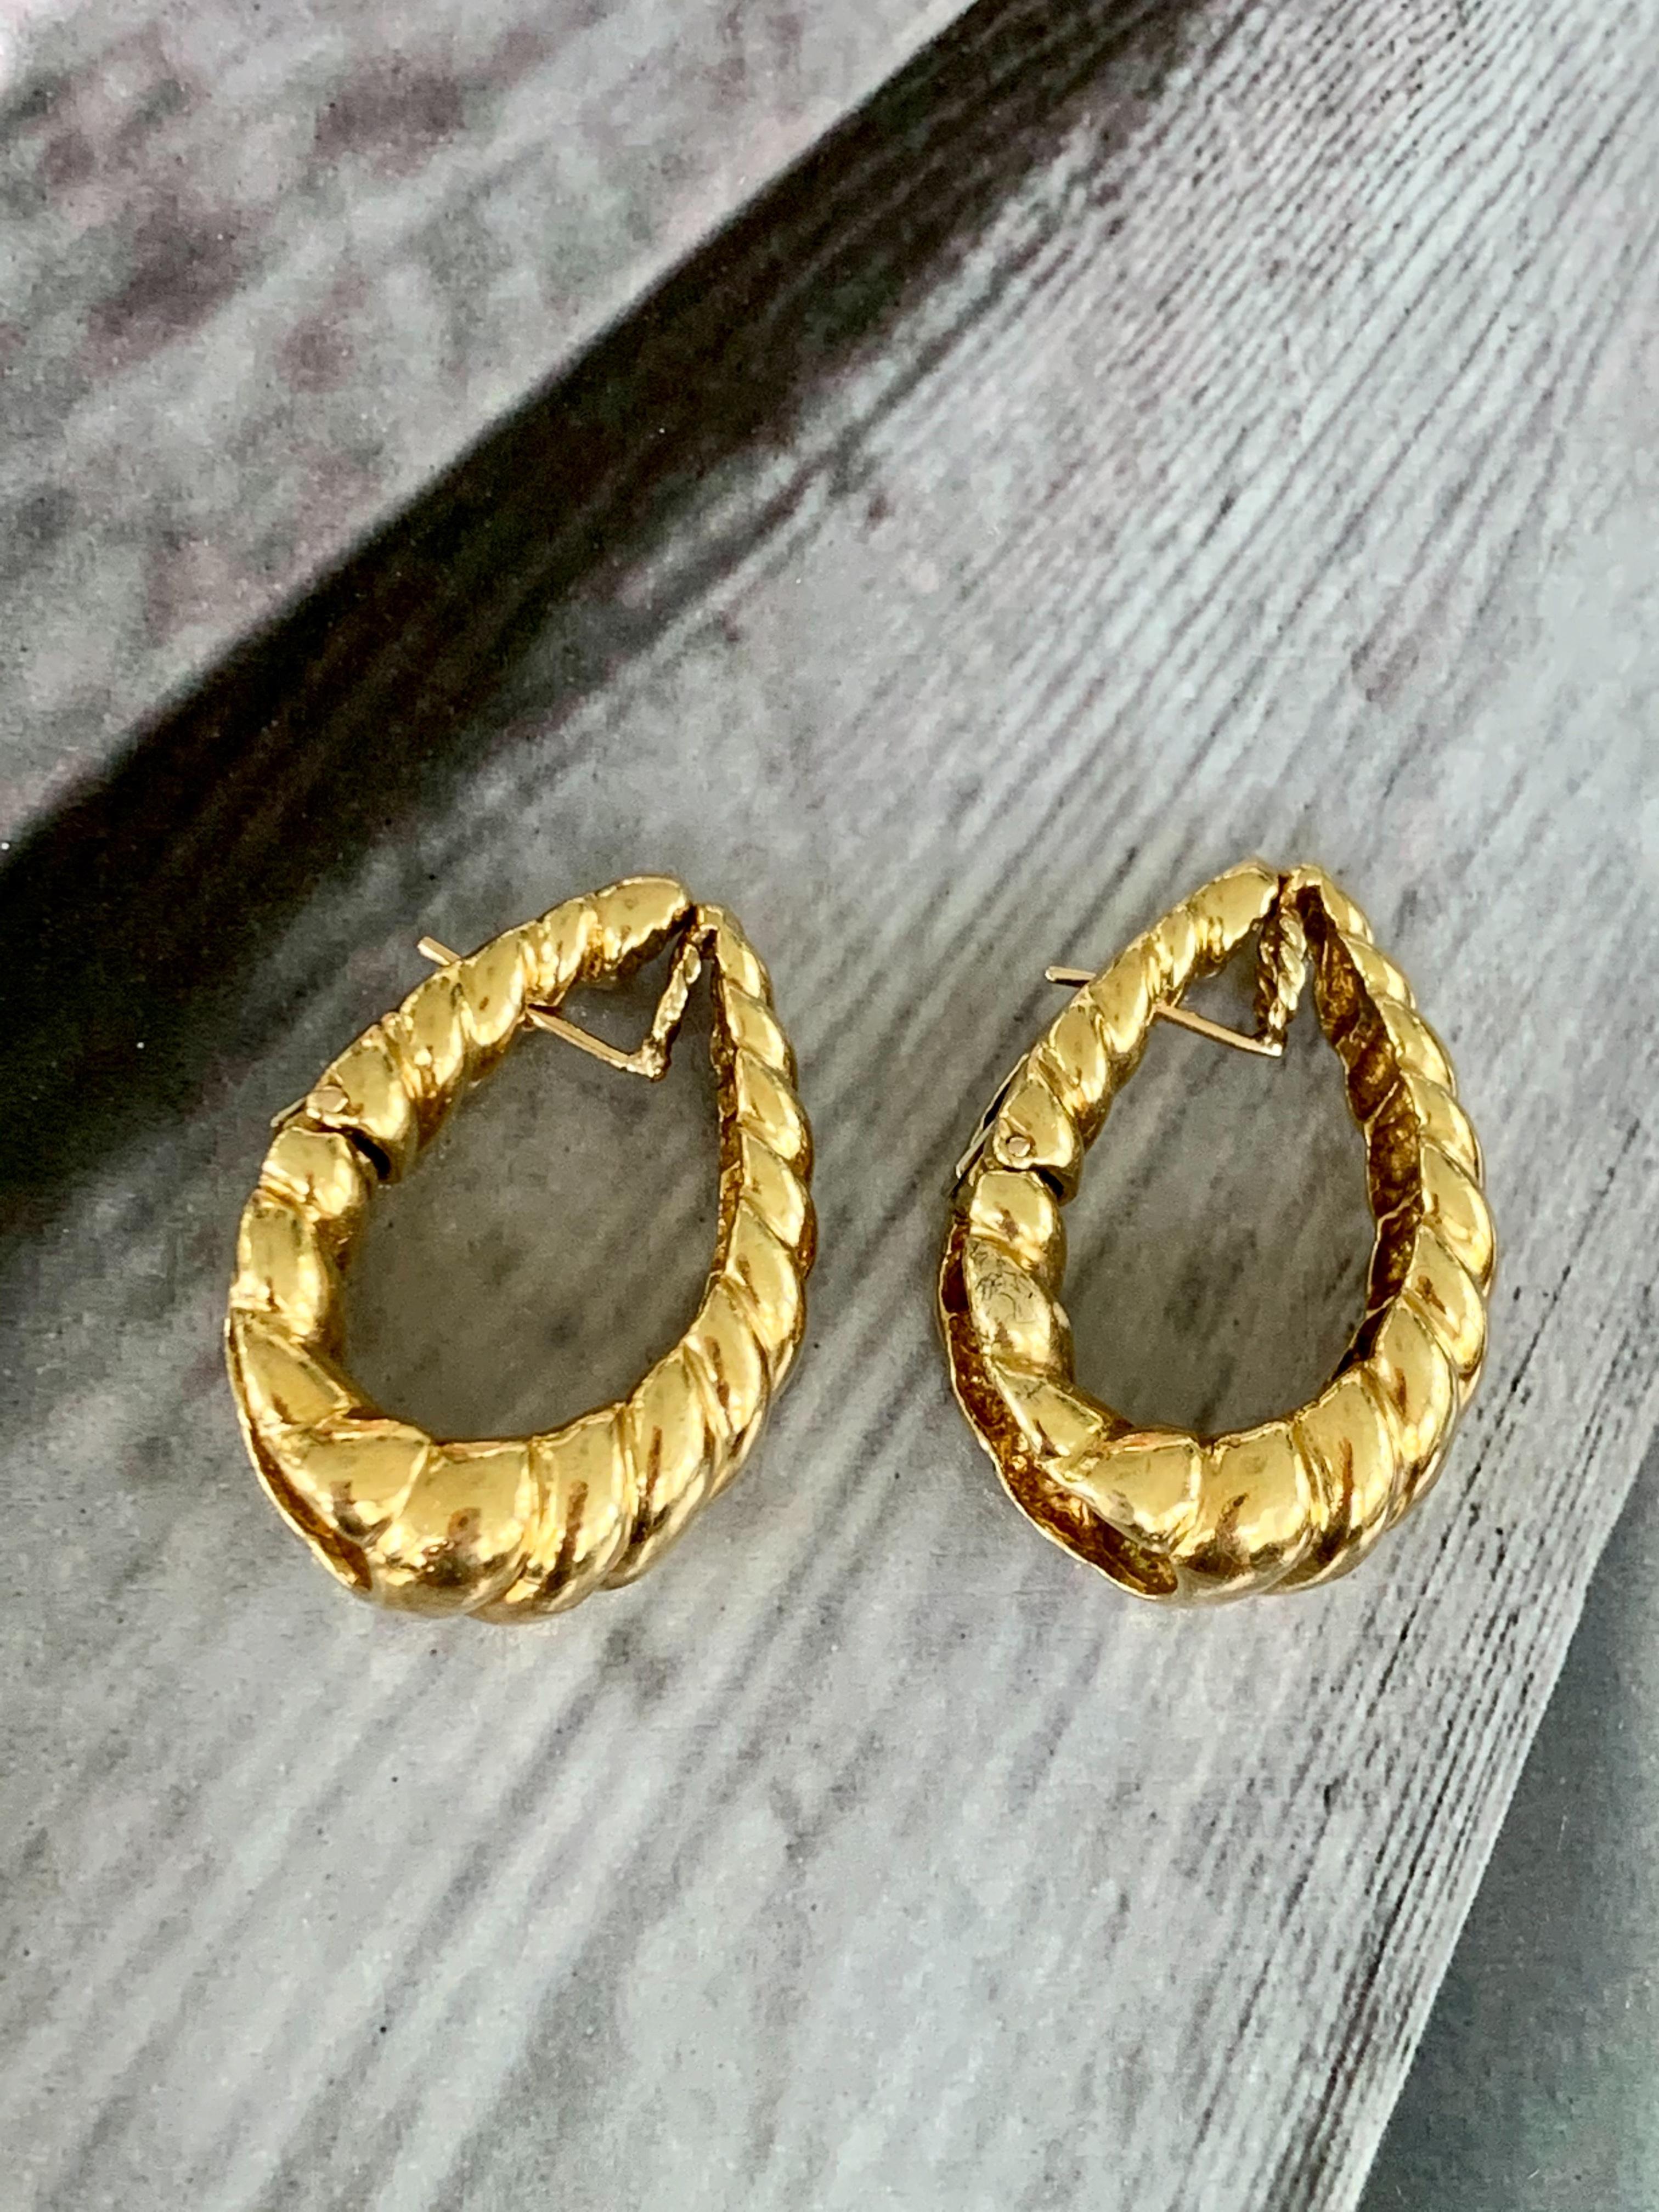 These Modern Scallop Design 18 Karat Yellow Gold hoop earrings feature a shrimp-style pierced clip-on closure which provides additional security to protect against loss.

There is no stamp.

Size: approximately 1-1/4